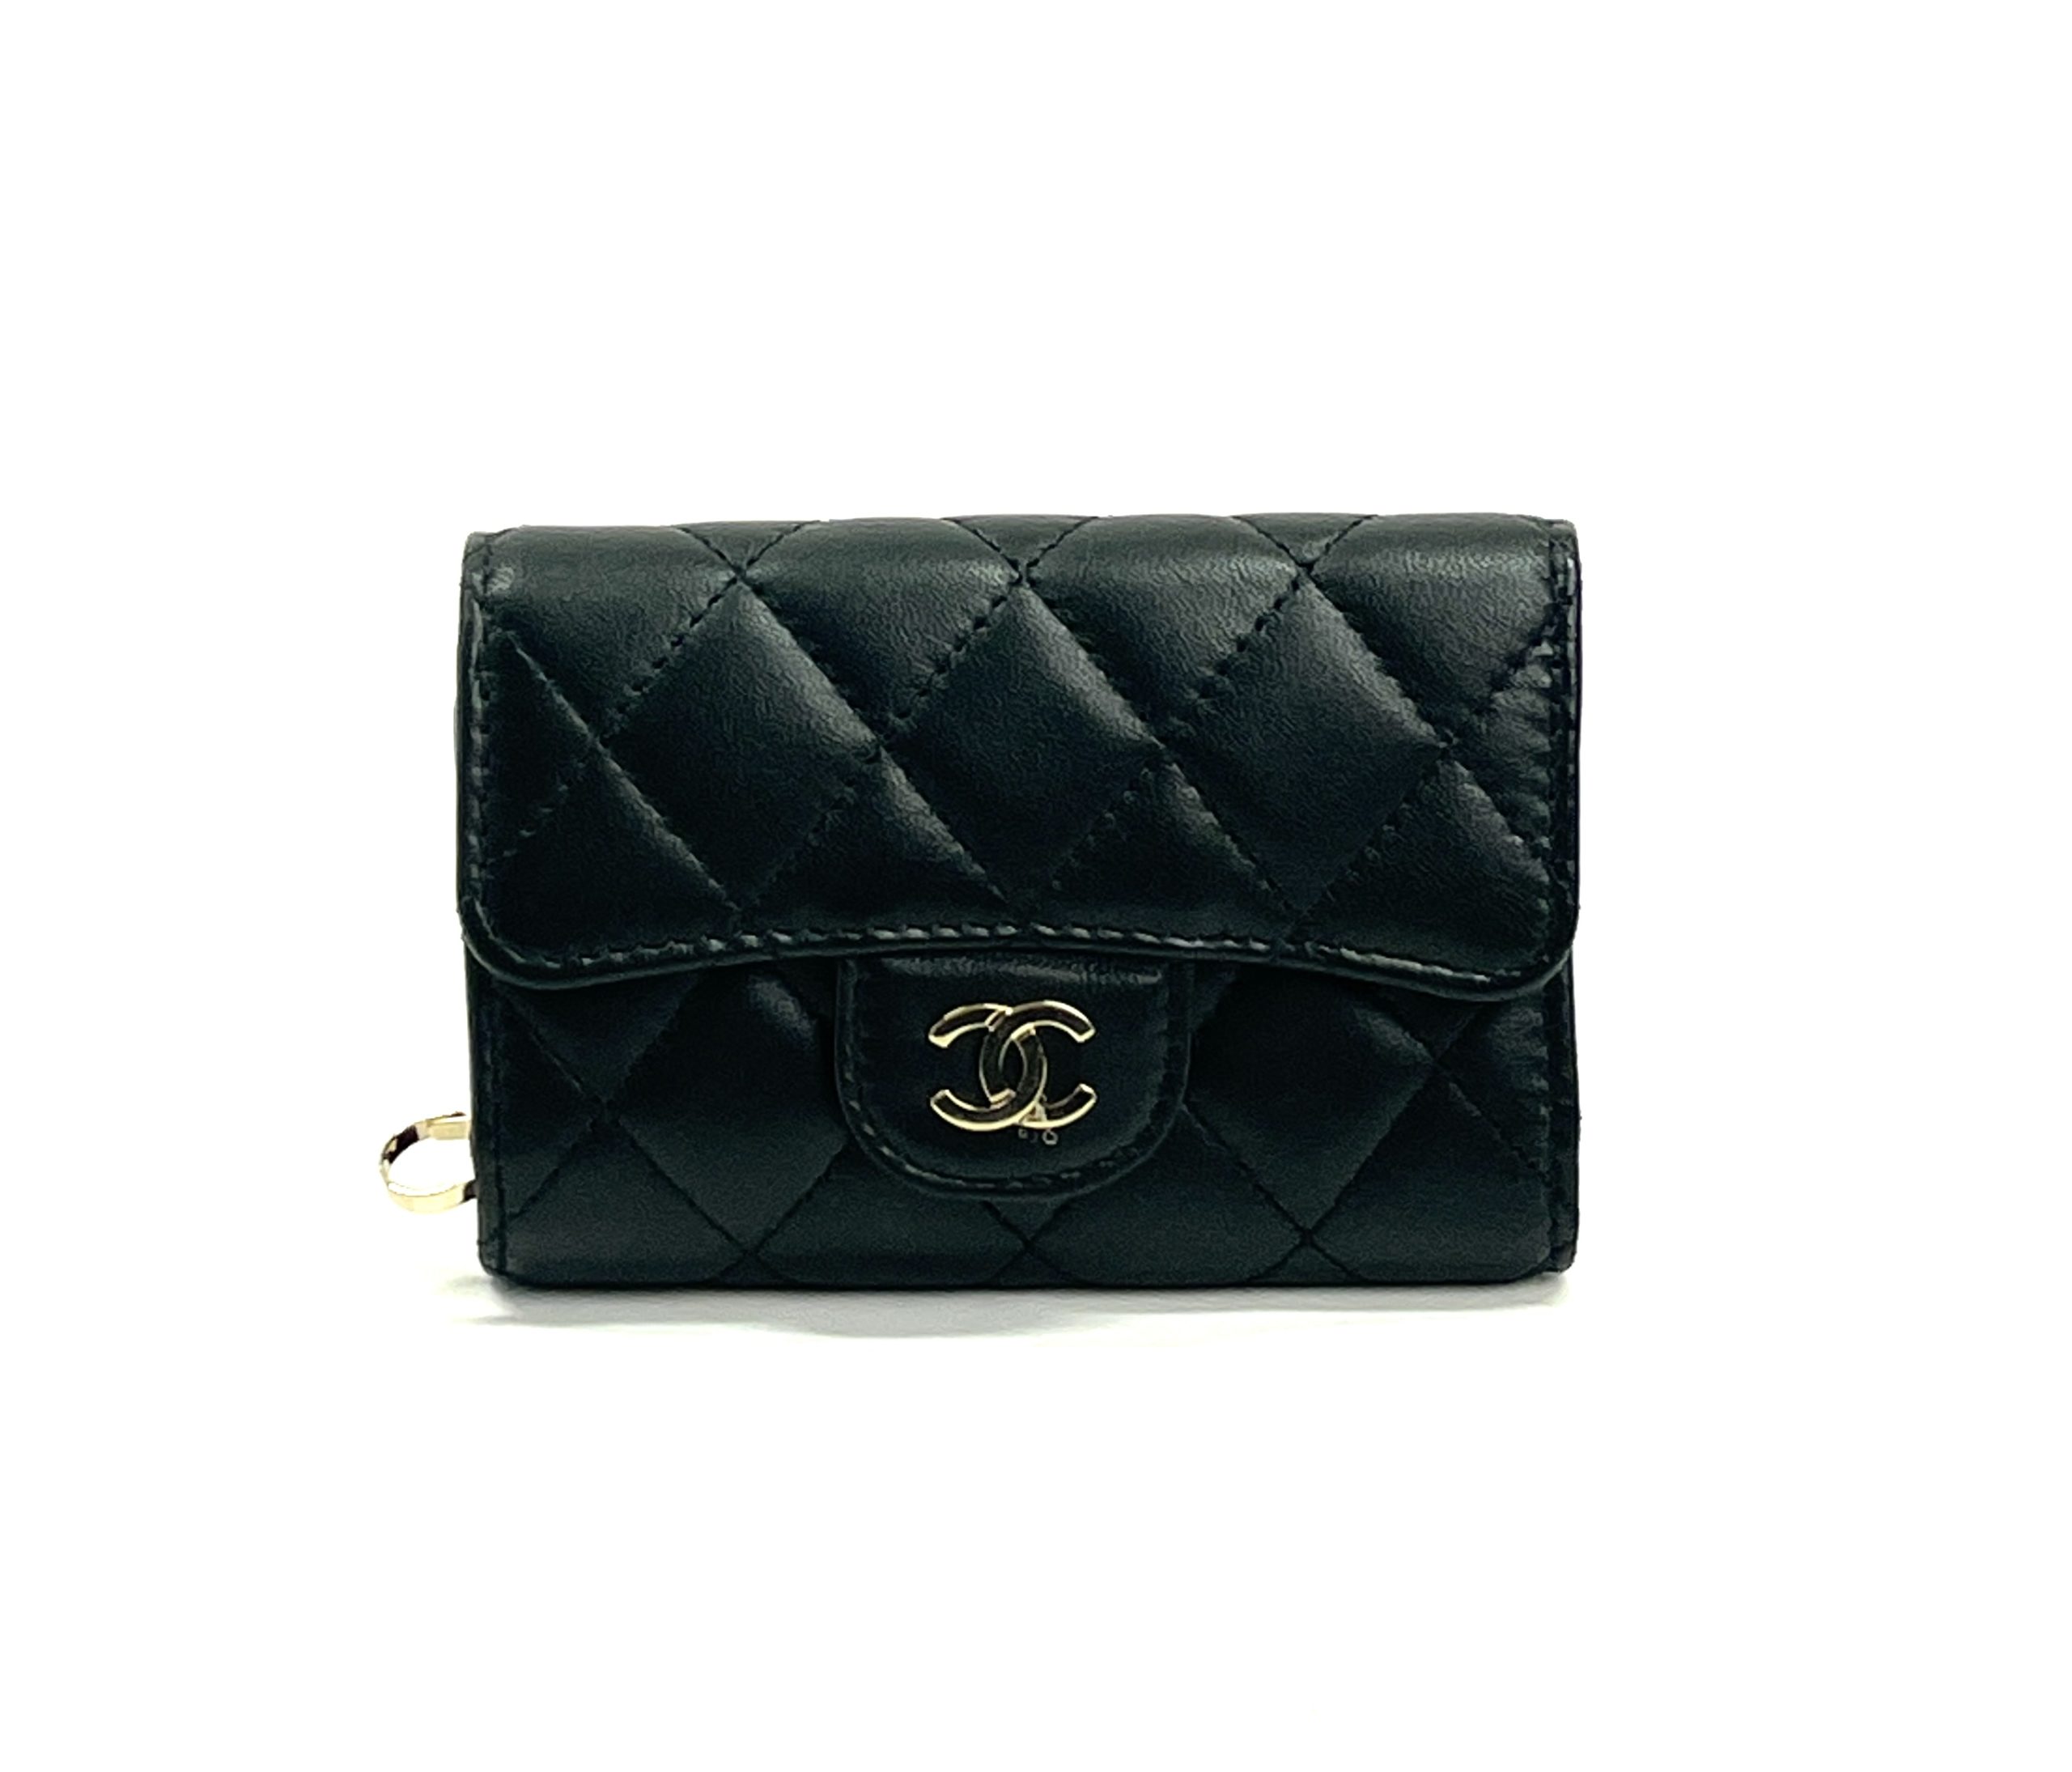 Chanel Black Lambskin Quilted 6 Key Holder with Gold Hardware - A